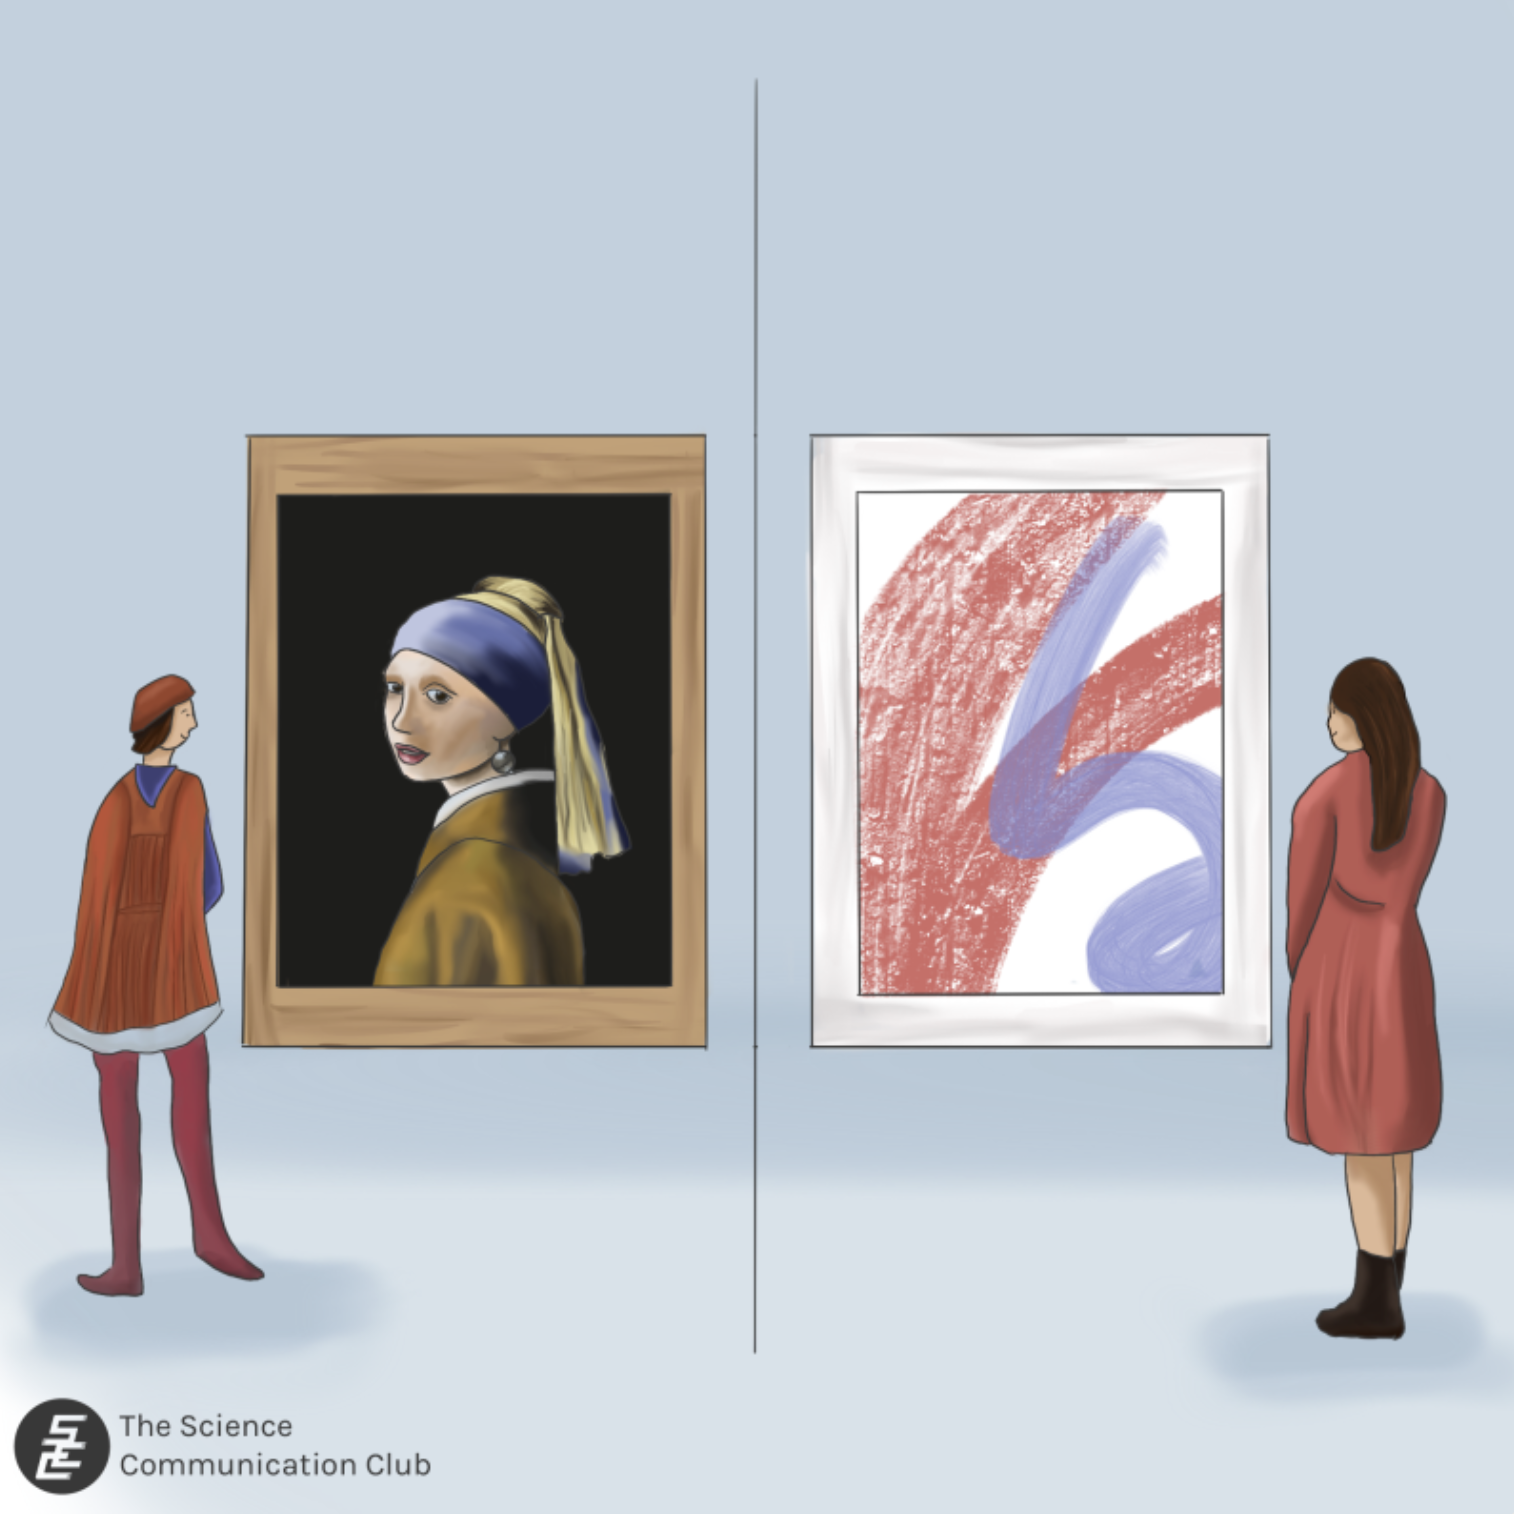 A man dressed in renaissance clothing admiring a renaissance style painting on the right and a woman dressed in modern clothings admiring an abstract painting on the left.